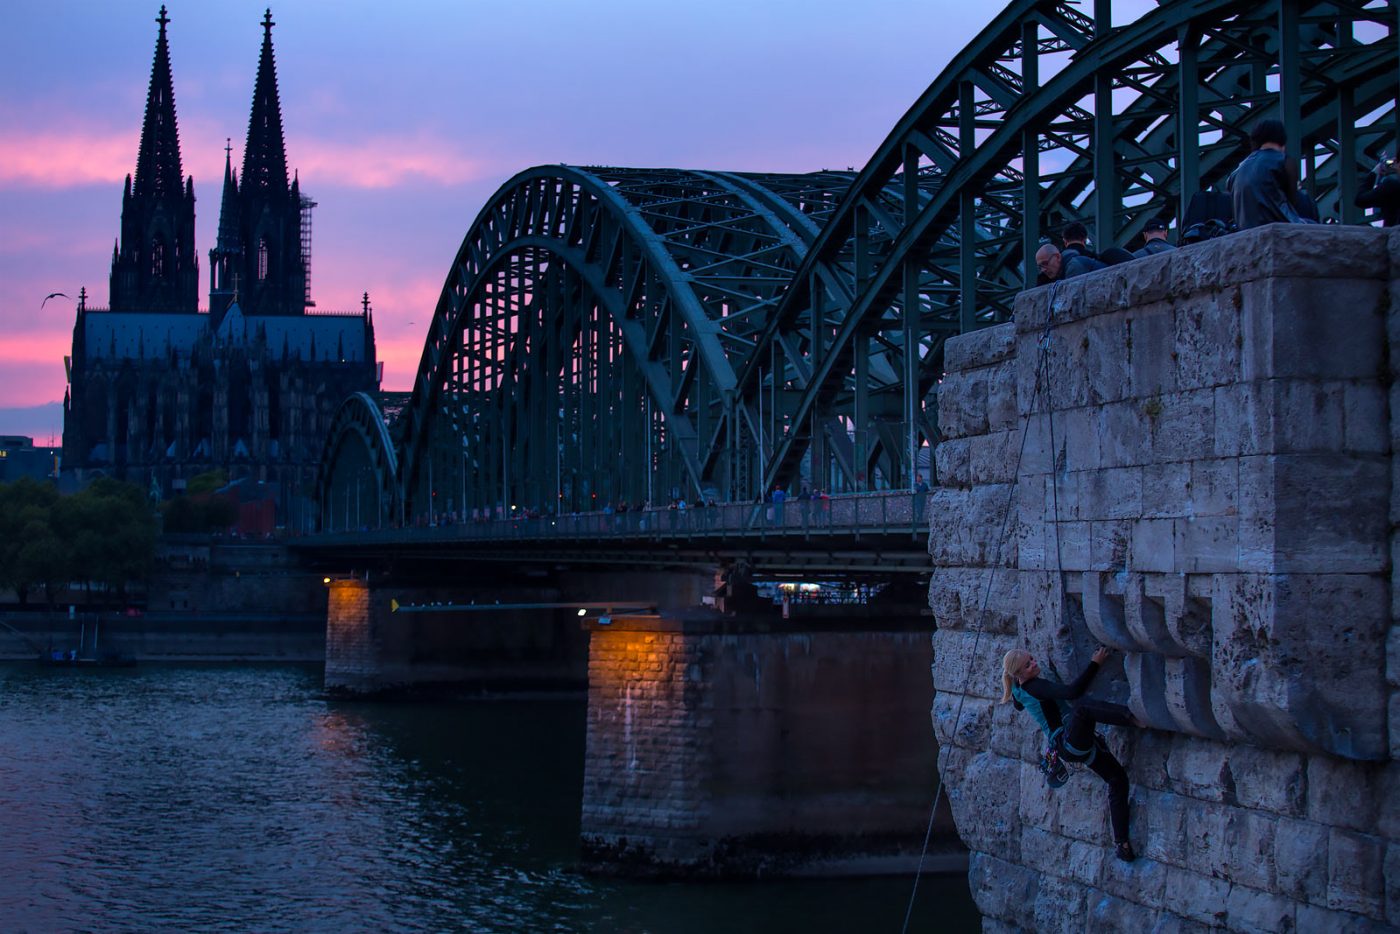 Rock climbing in Cologne, Germany, along the Rhein River.